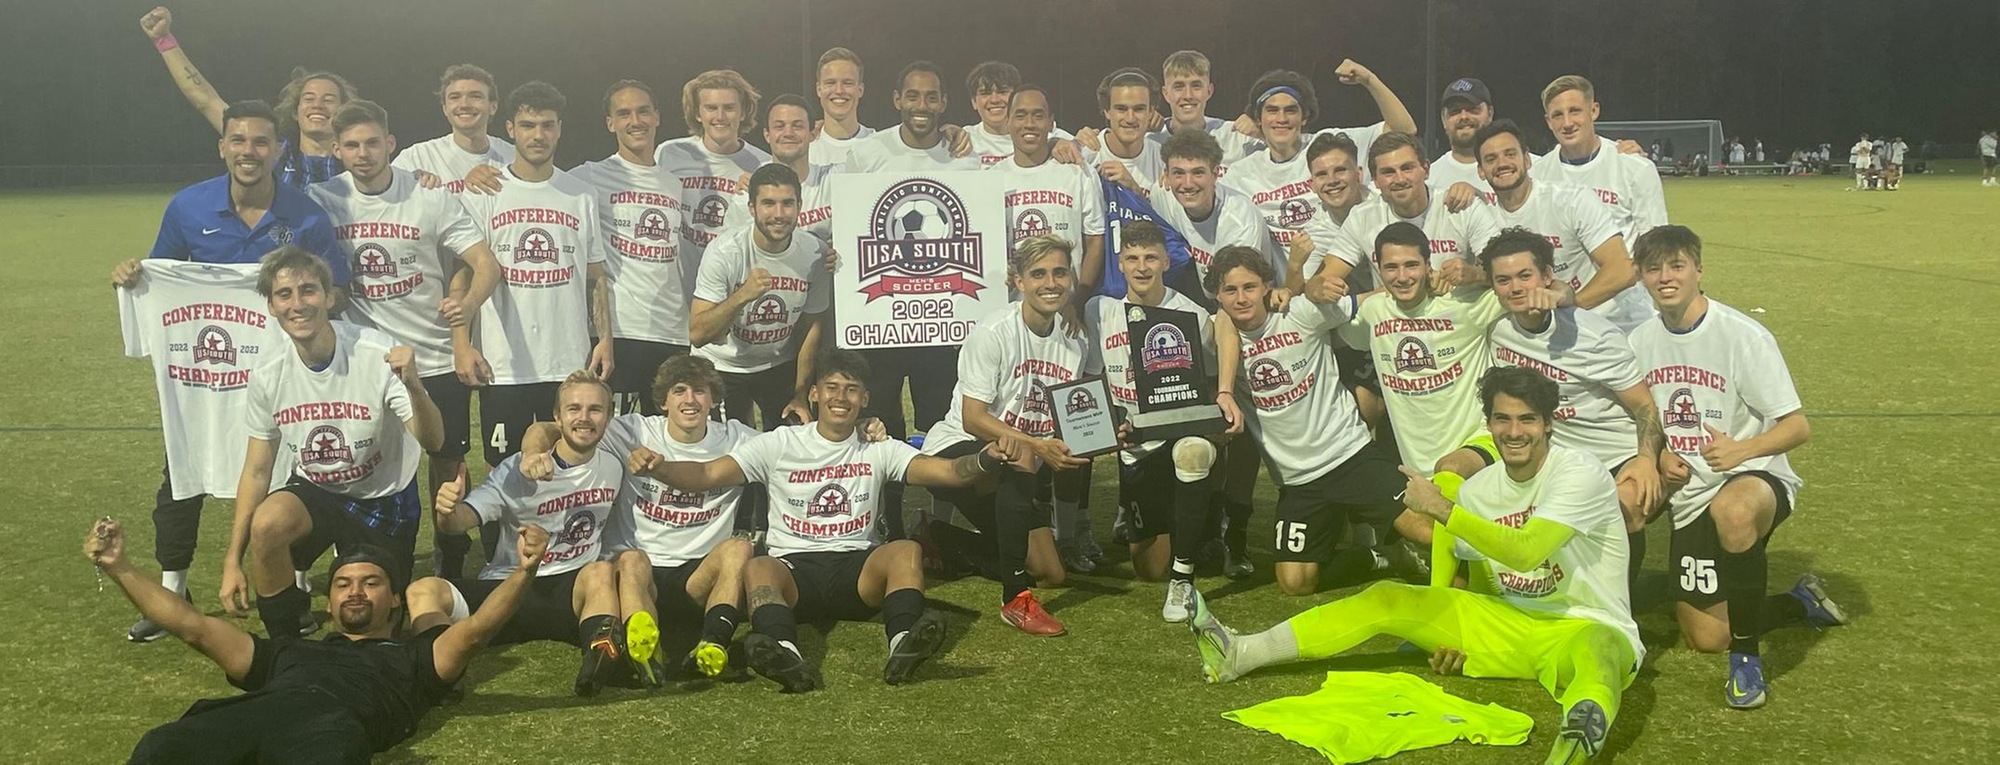 CHAMPIONS!!! Men’s Soccer Battles Back to Win USA South Championship in Double-Overtime; Tornados Advance to School’s First-Ever NCAA DIII Tournament